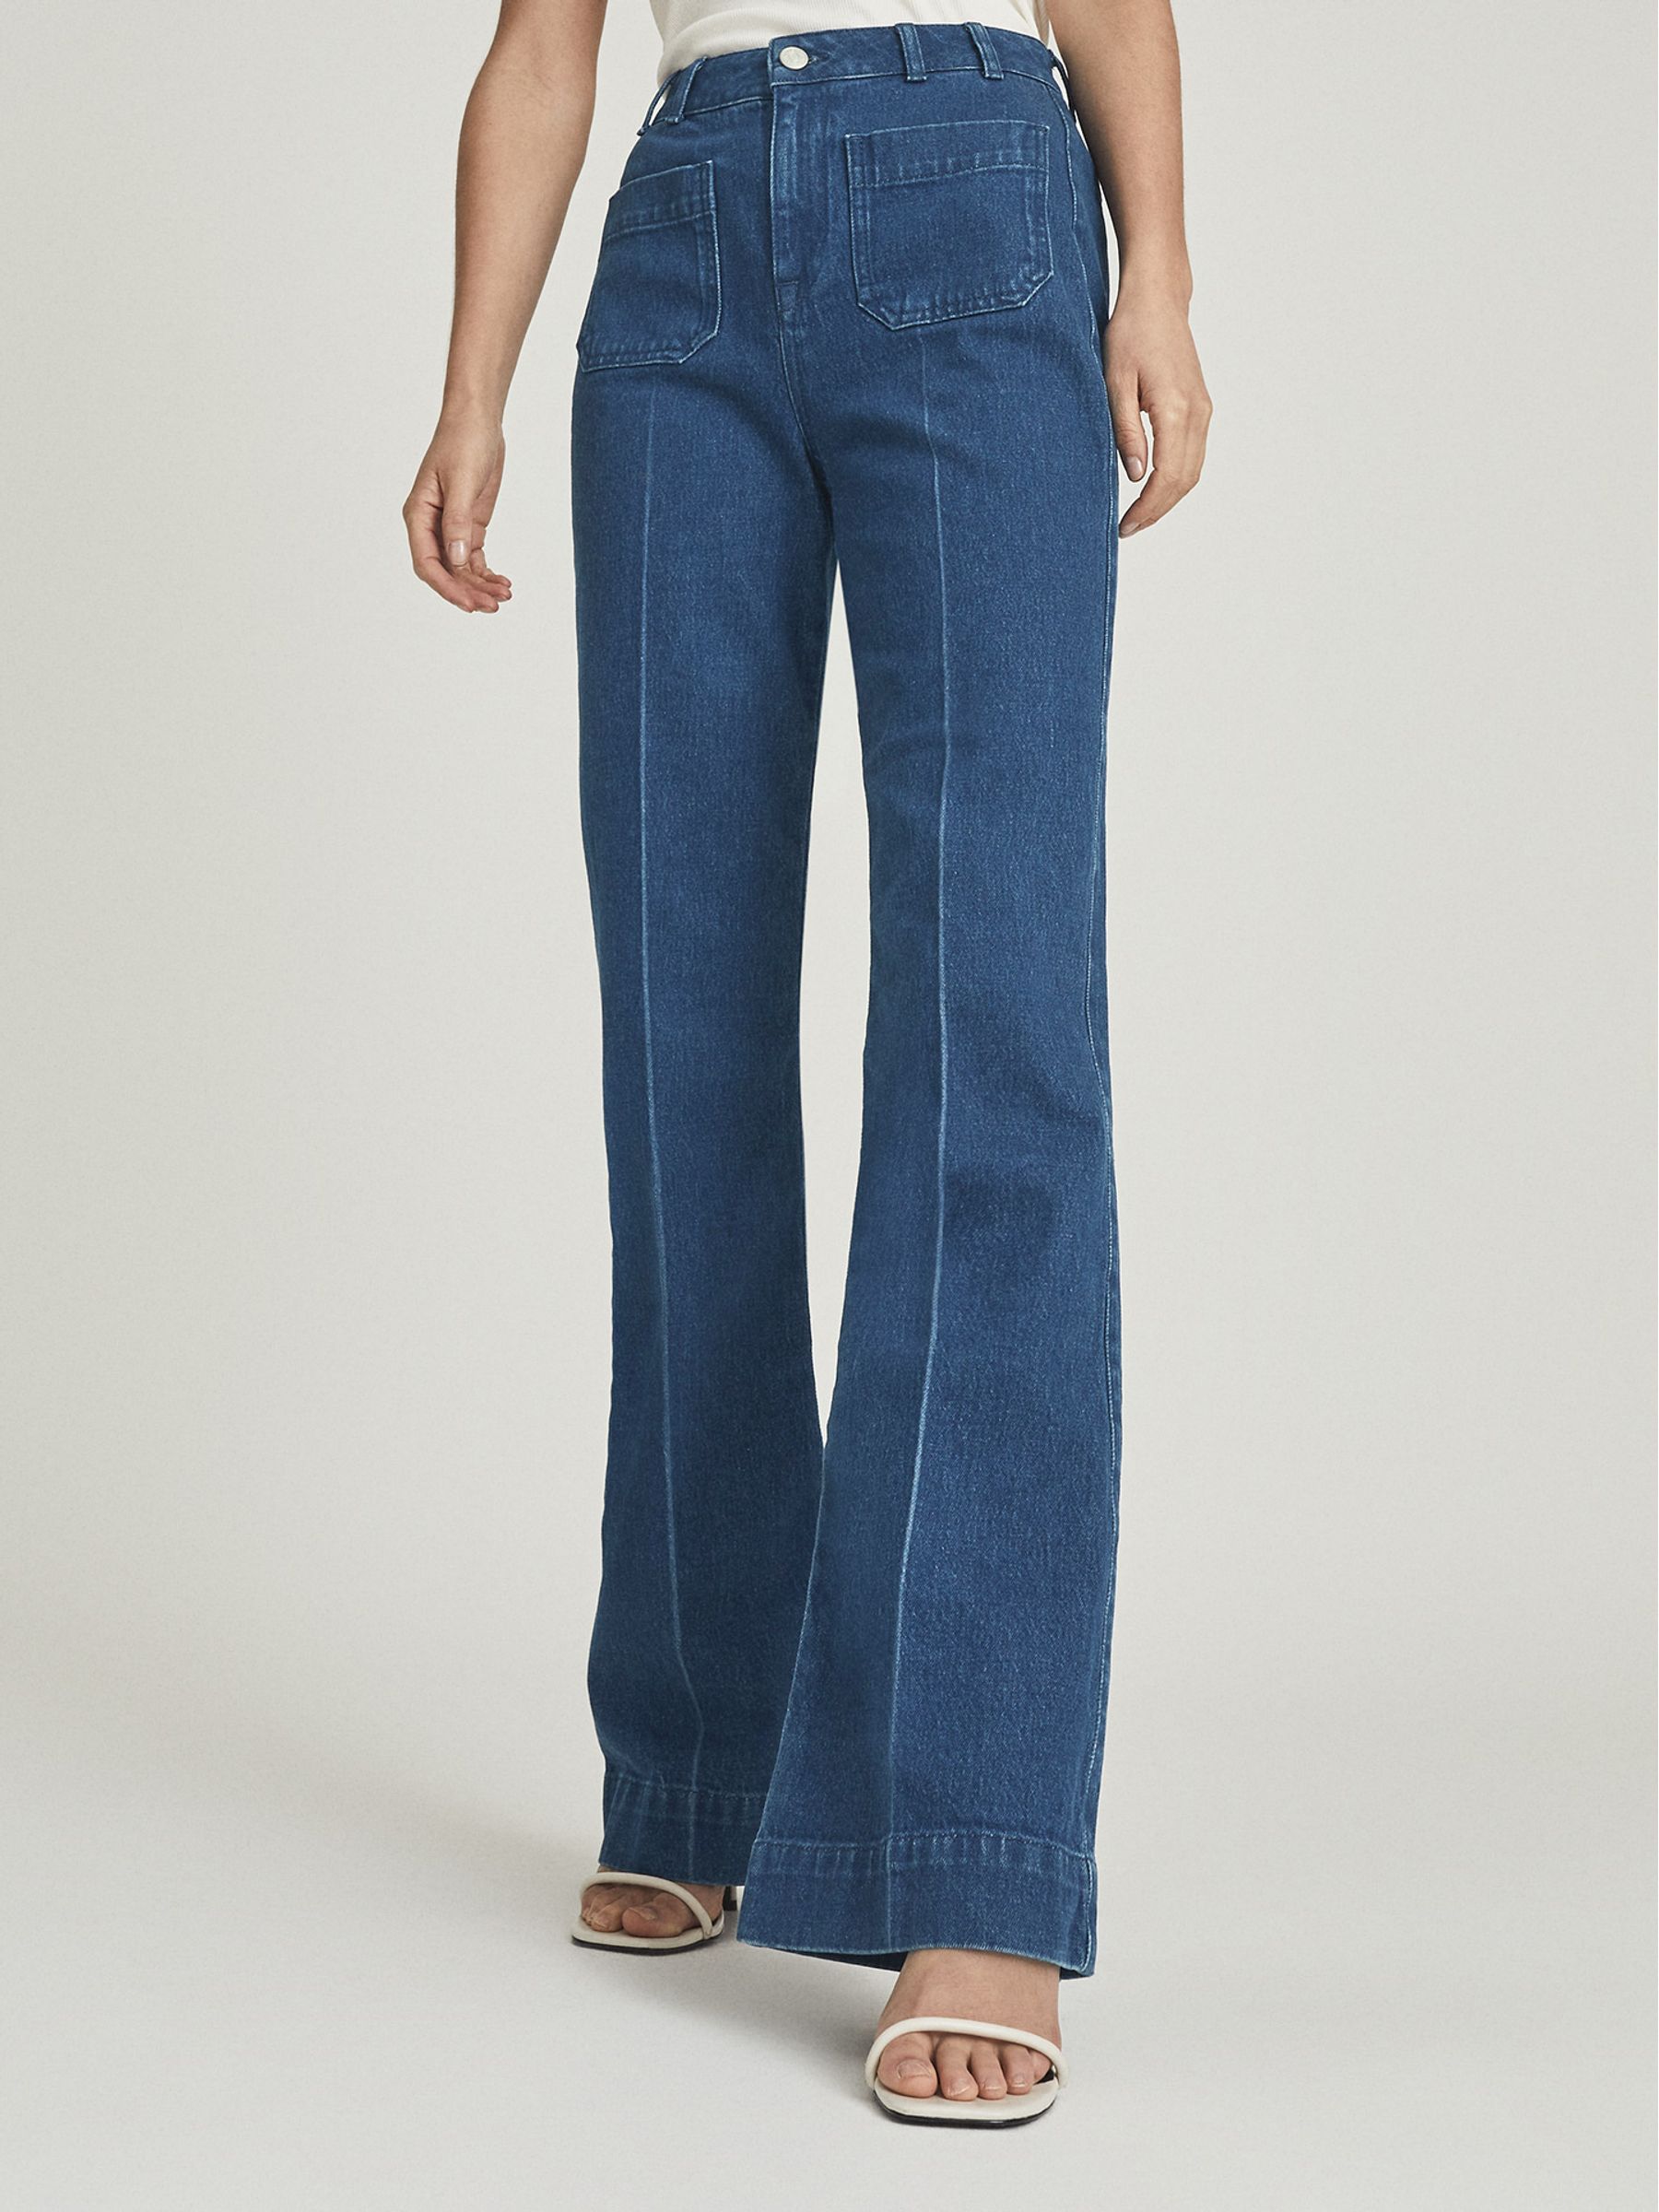 Reiss Isa High Rise Flared Jeans - REISS